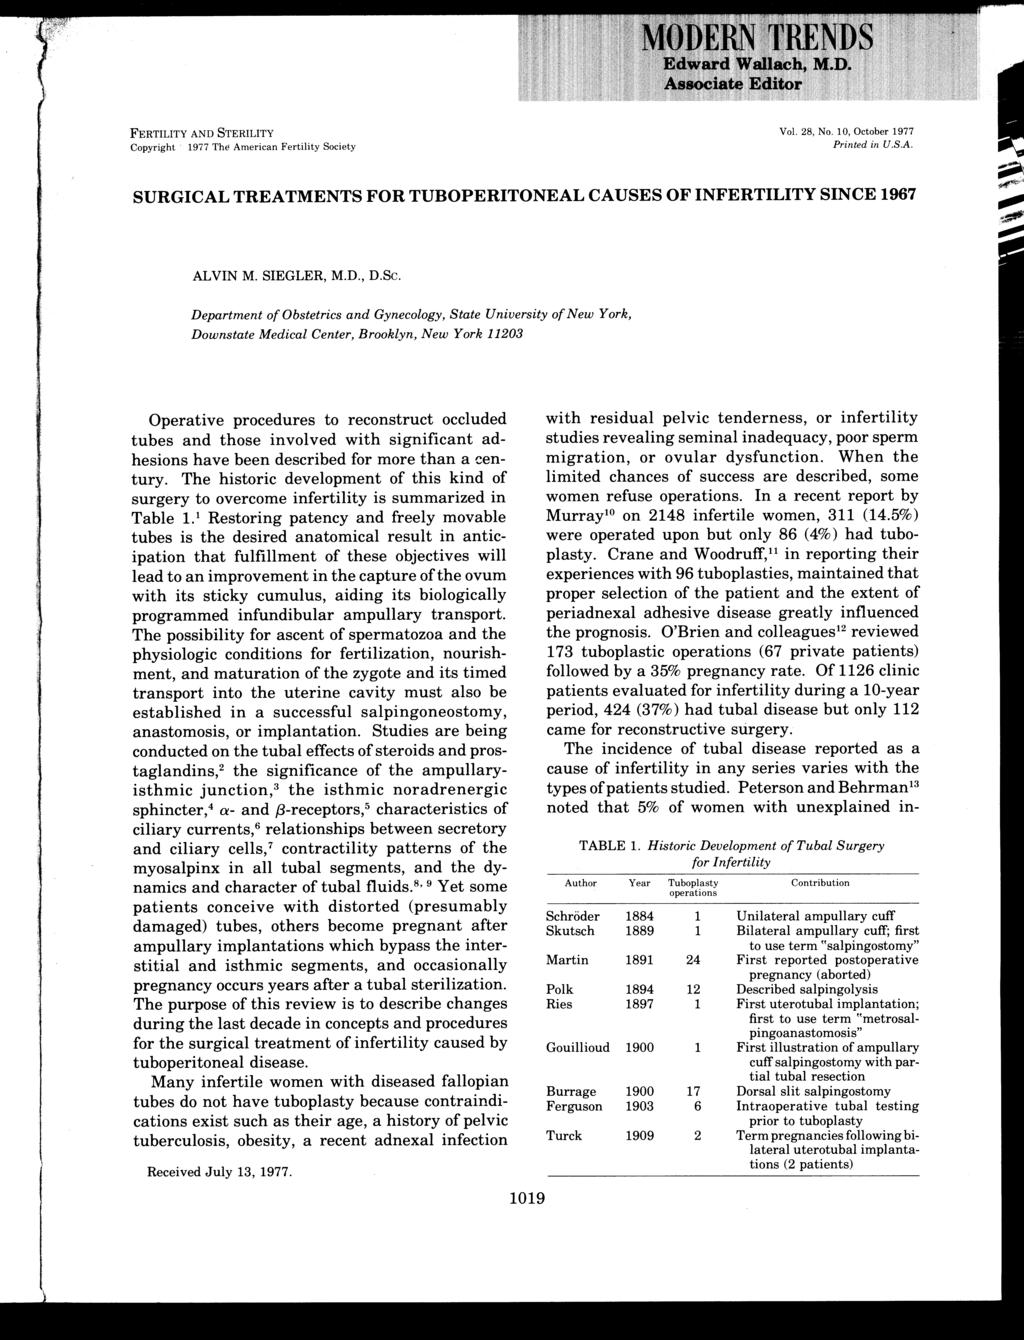 FERTILITY AND STERILITY Copyright 1977 The American Fertility Society Vol. 28, No. 10, October 1977 Printed in U.S.A. SURGICAL TREATMENTS FOR TUBOPERITONEAL CAUSES OF INFERTILITY SINCE 1967 ALVIN M.